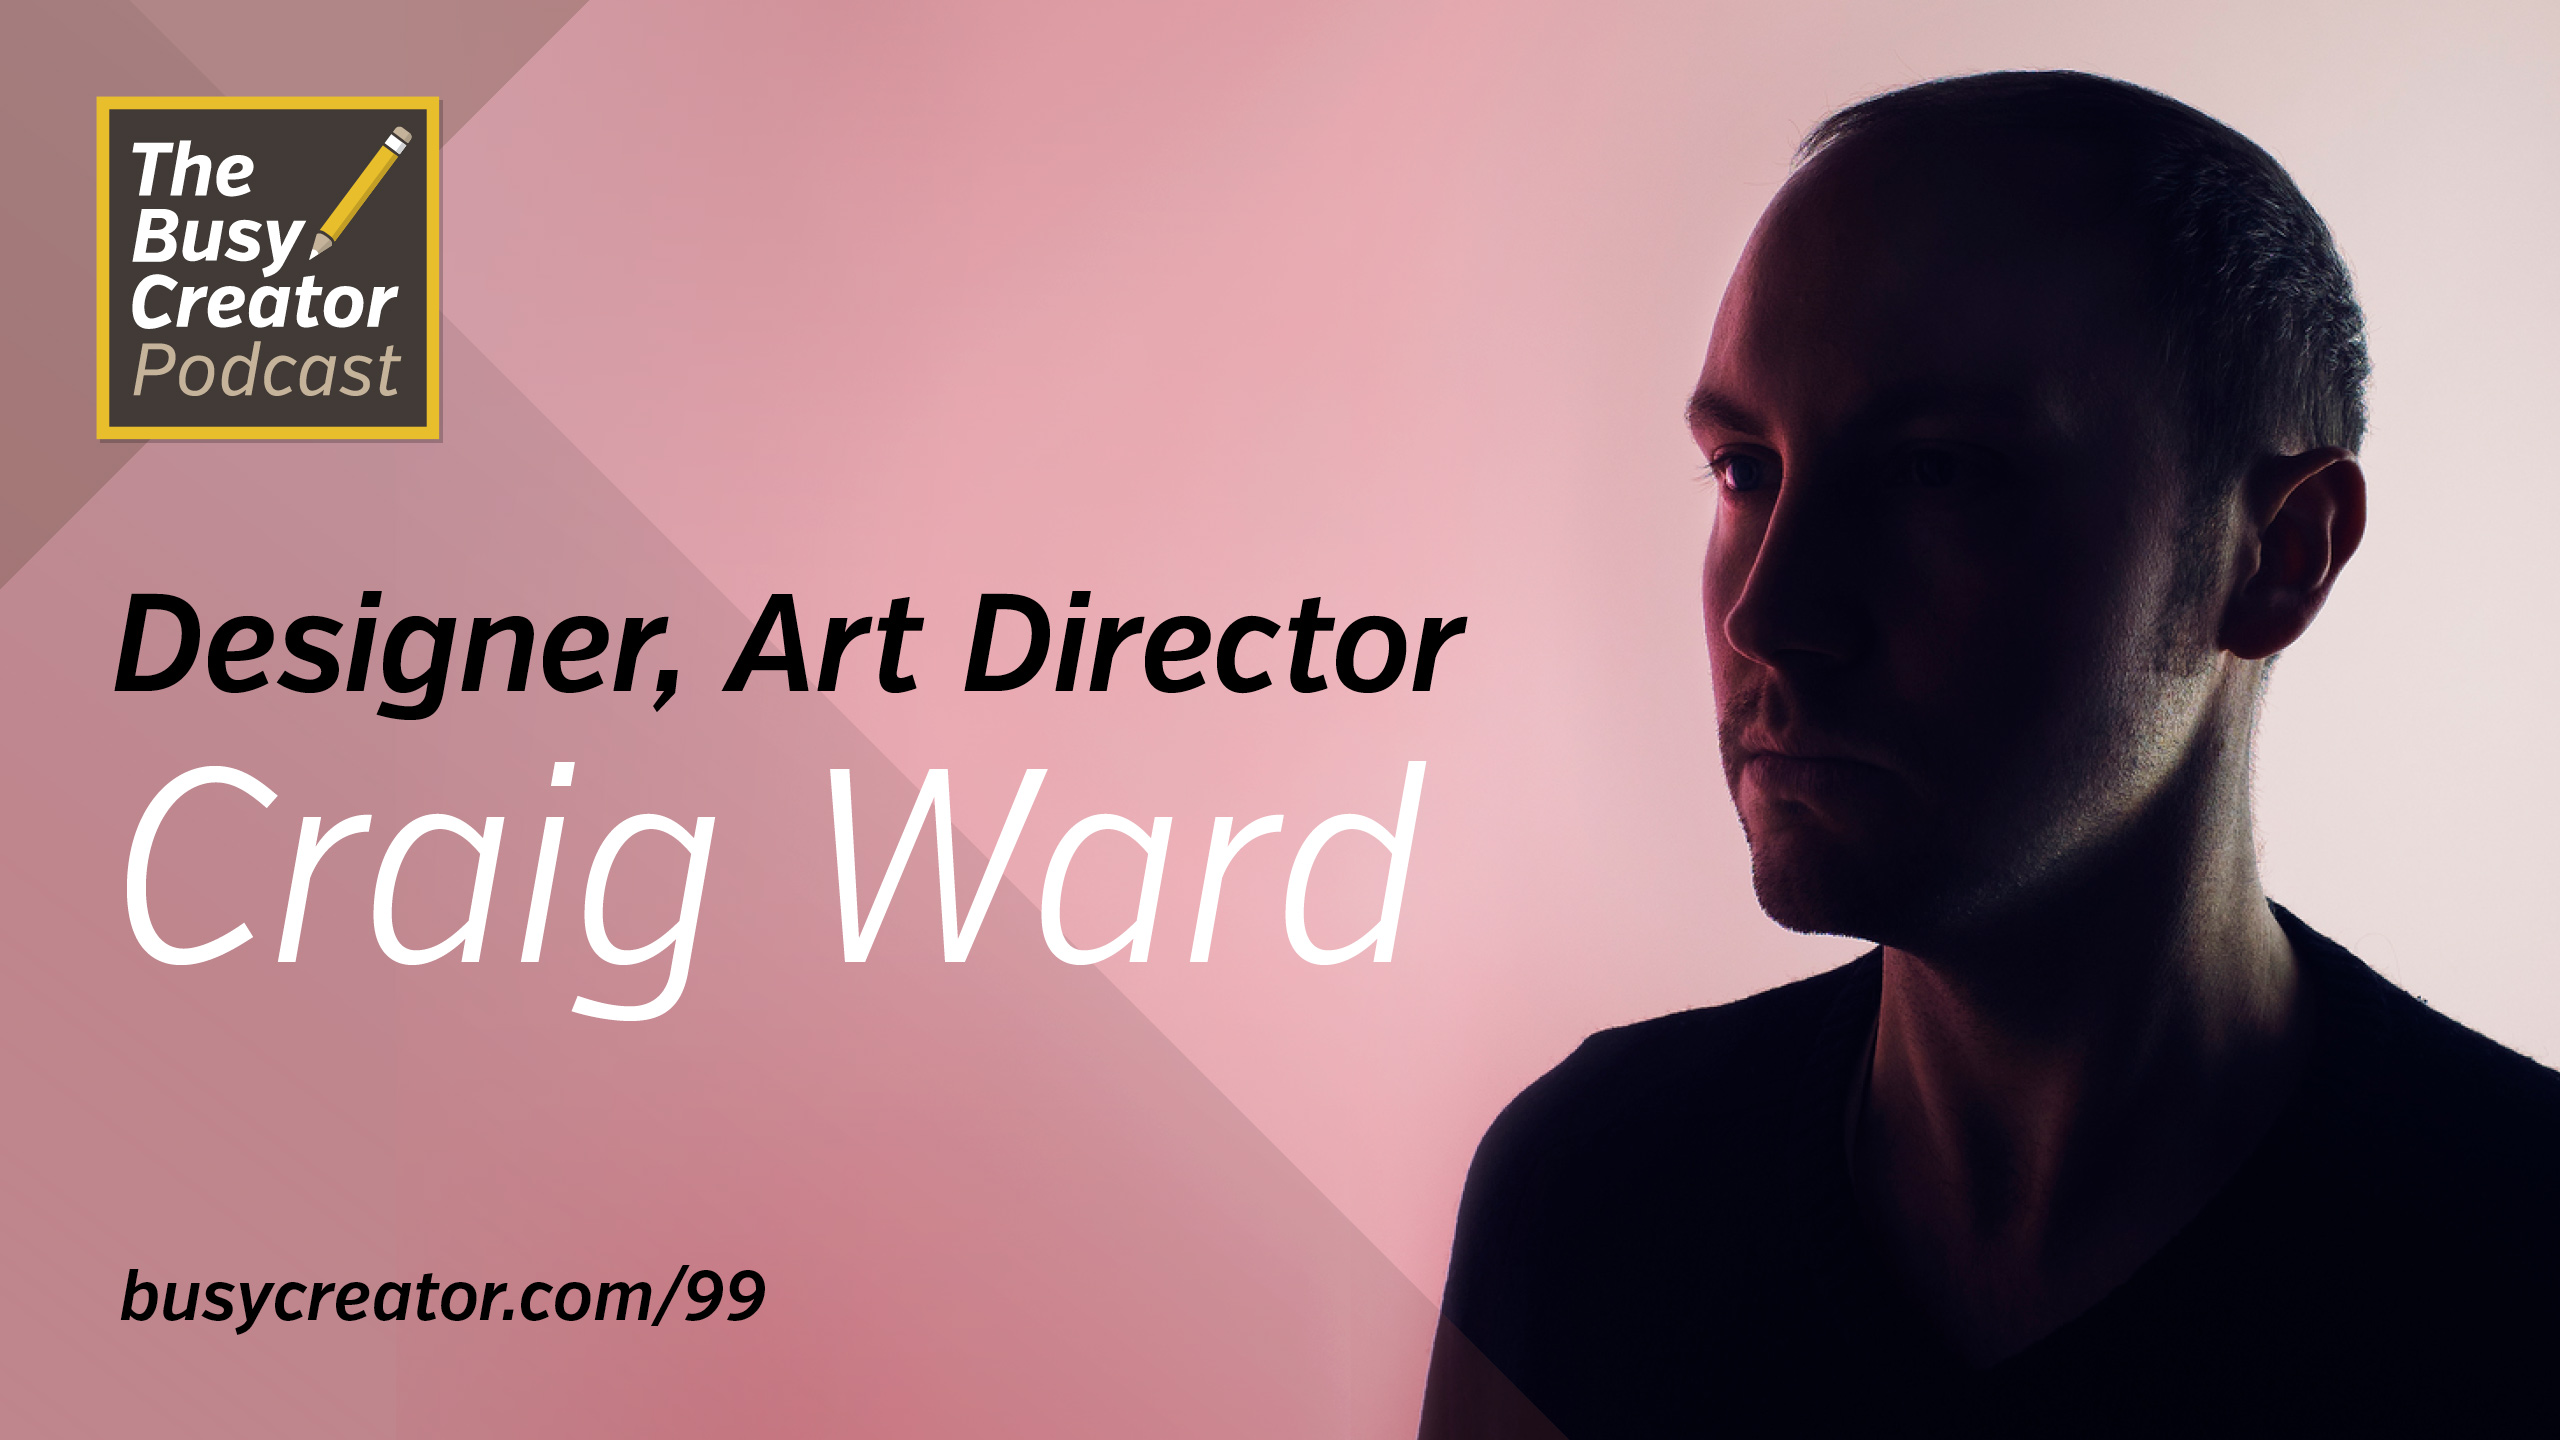 There and Back Again, Craig Ward Discusses Joining A Large Agency After Years of Successful Solo Practice